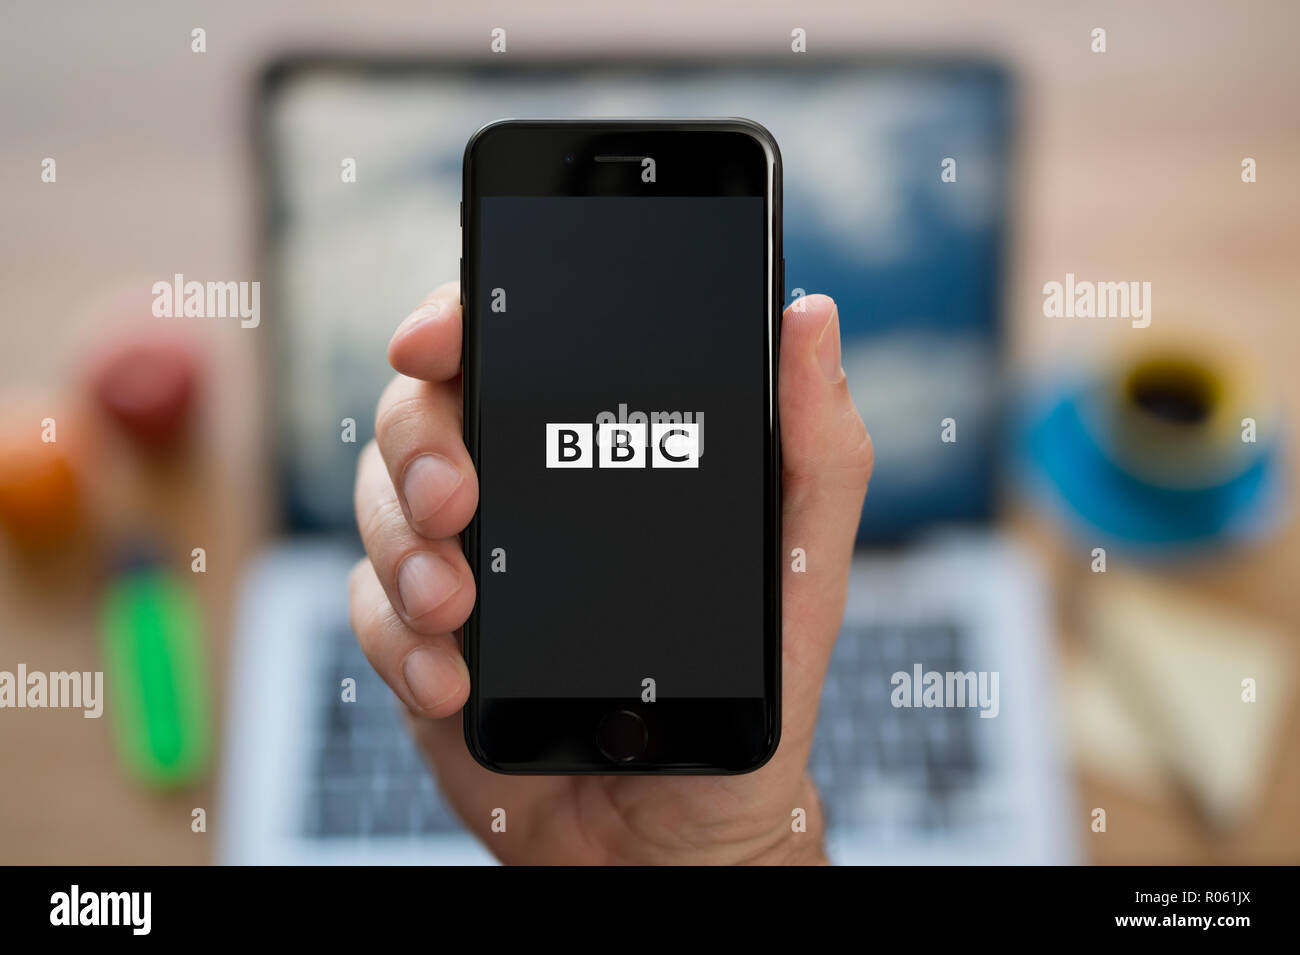 A man looks at his iPhone which displays the BBC logo, while sat at his computer desk (Editorial use only). Stock Photo